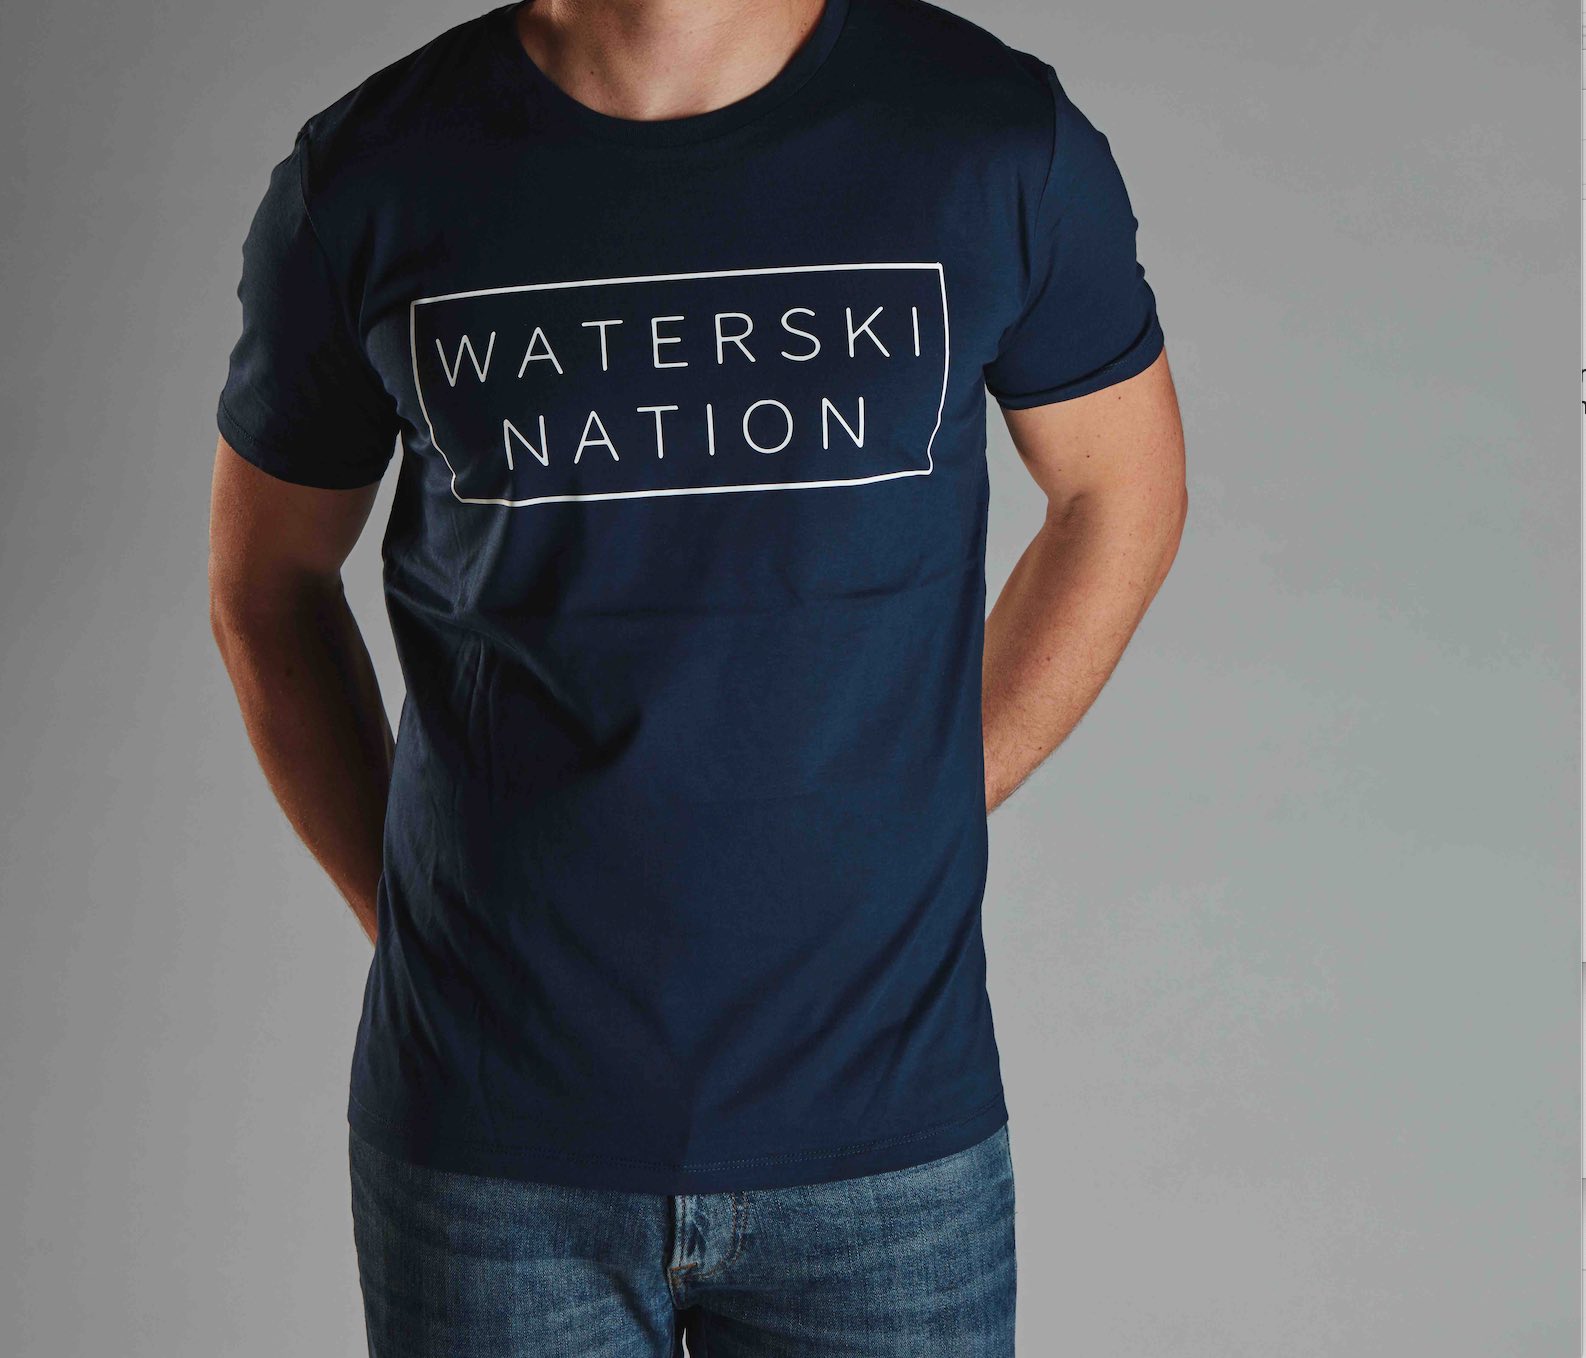 Waterski Nation Entertaining Content Provider